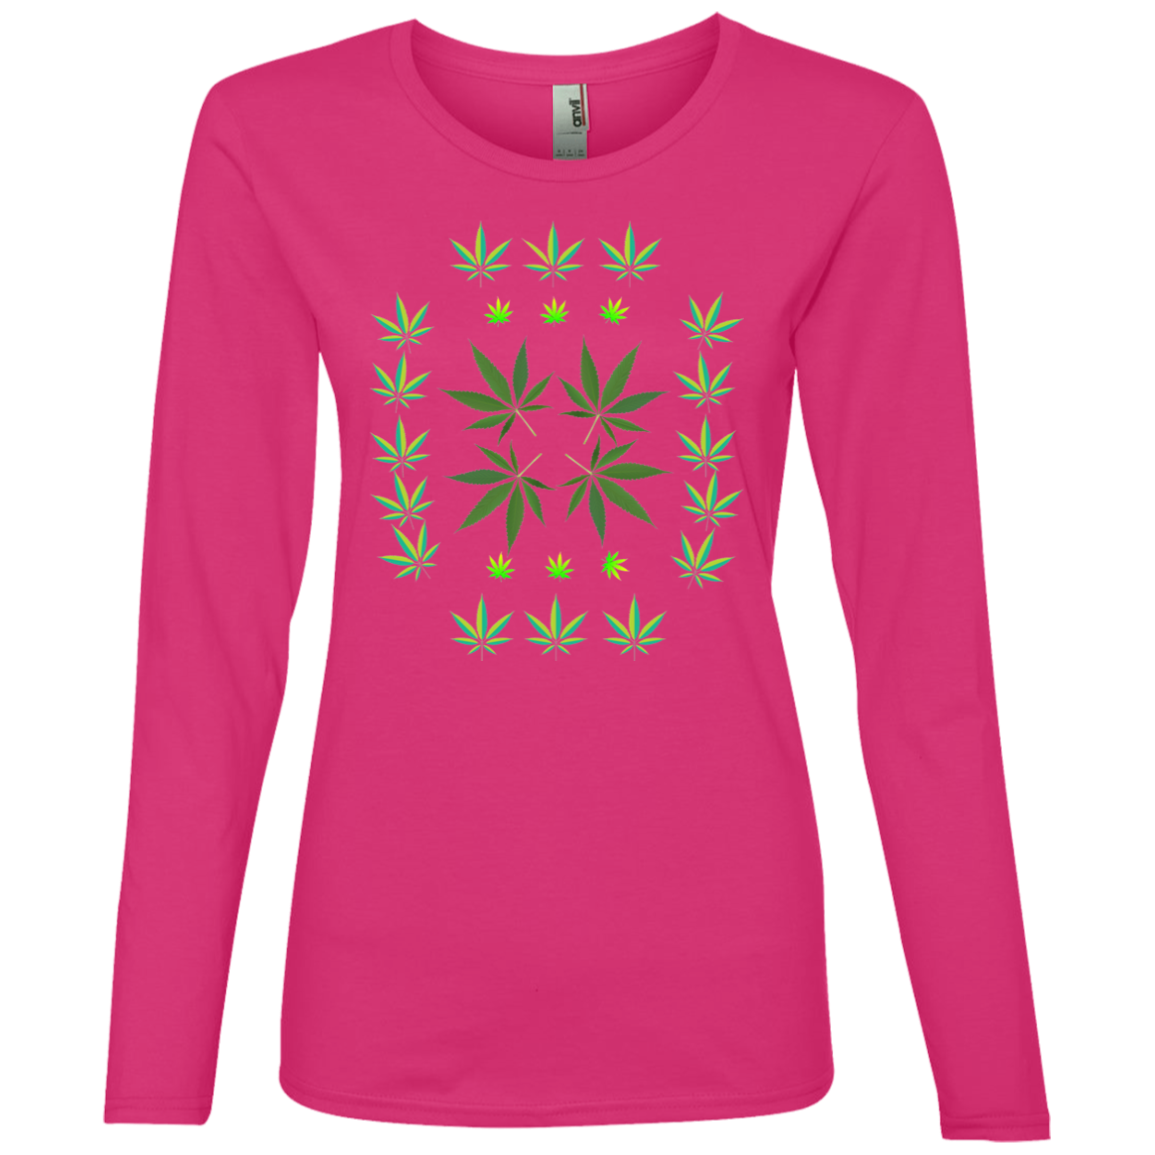 FASHION 420 Lovely Leaf LS Woman's Fitted T-Shirt - FabulousLife